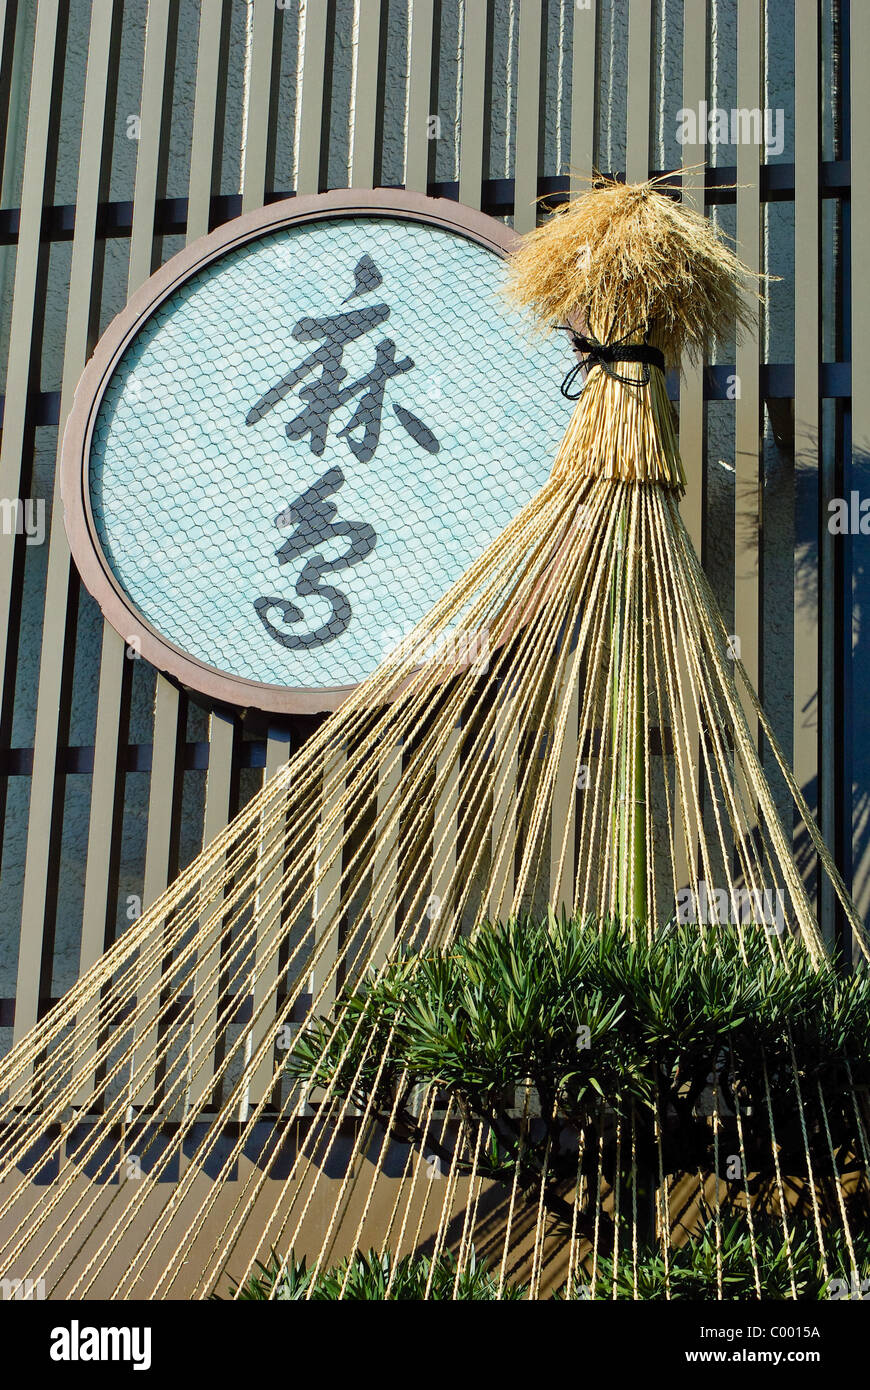 Entrance to a Japanese Restaurant in Asakusa, Tokyo with a decoration of strings and dried rice, Japan Stock Photo